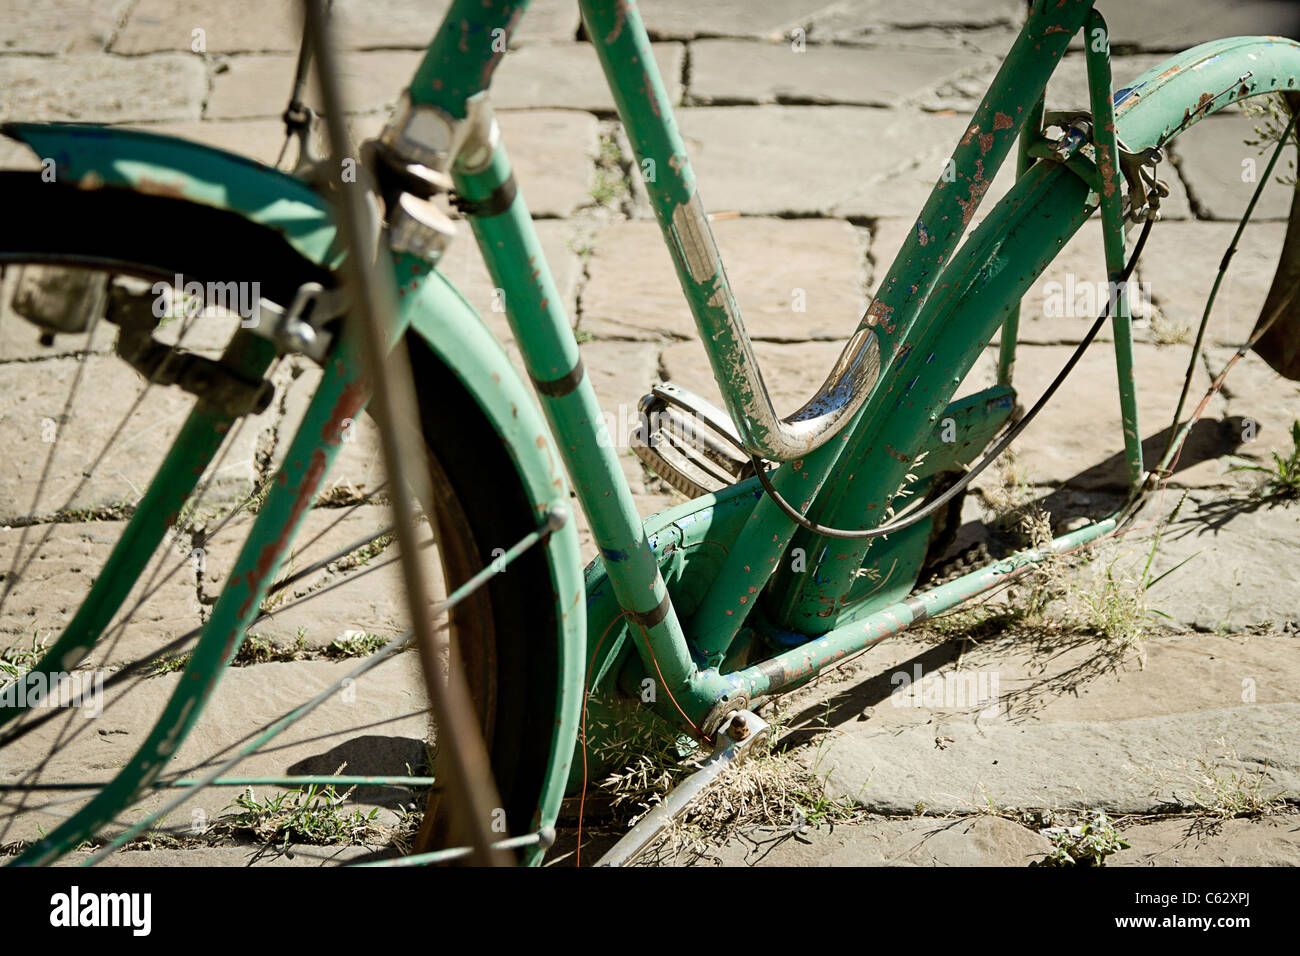 A broken and abandoned bicycle on an urban street Stock Photo